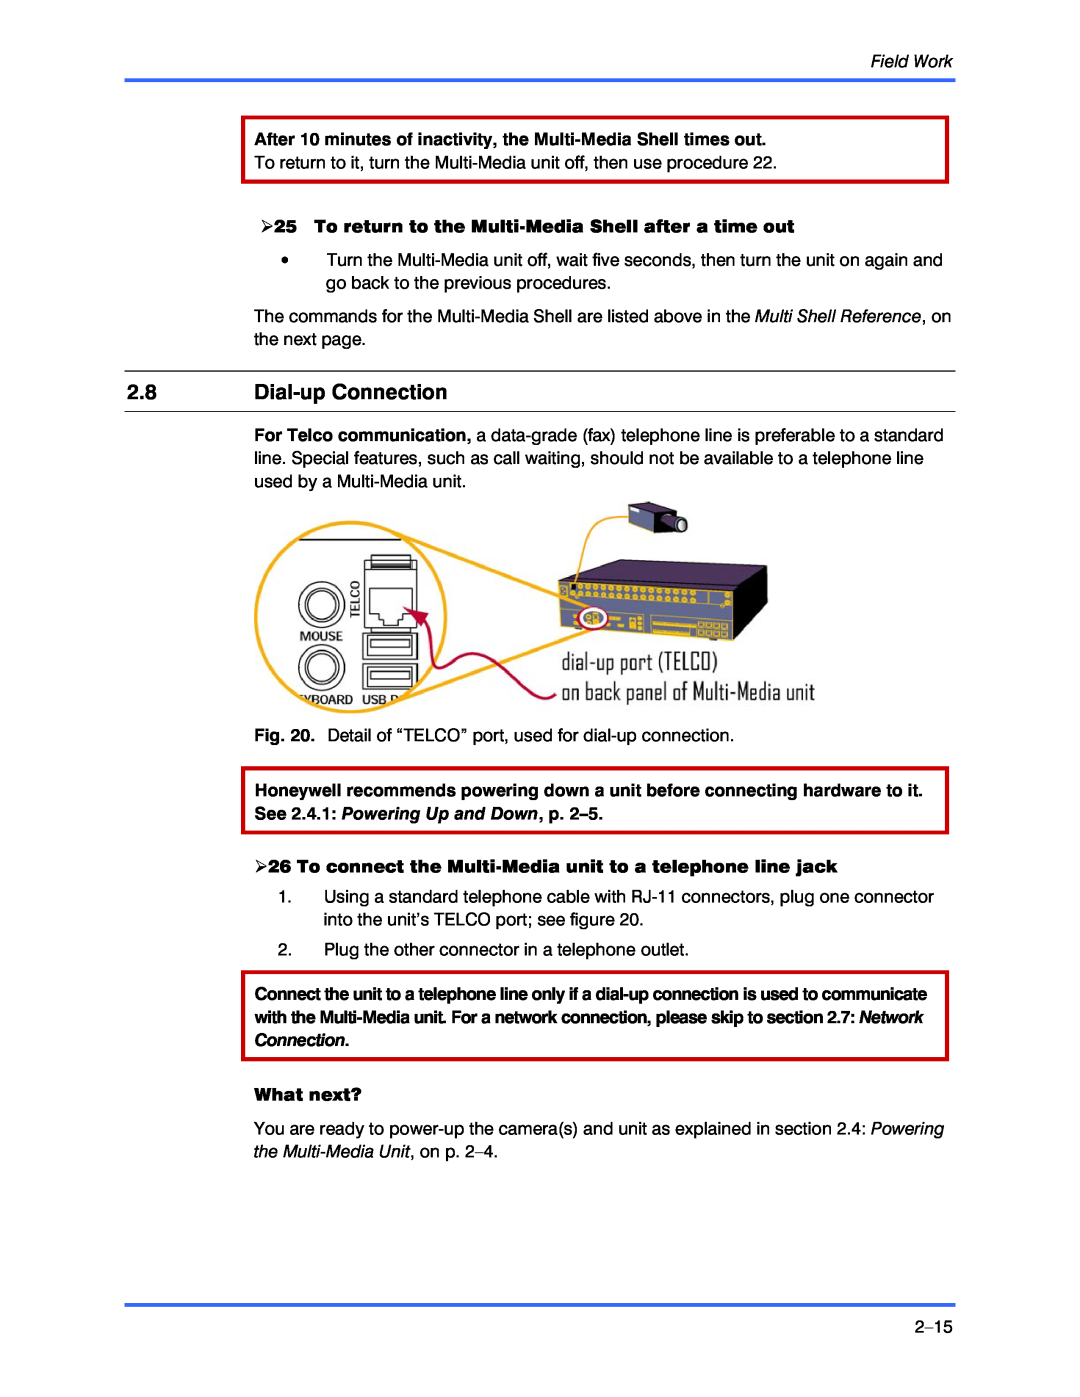 Honeywell K9696V2 installation instructions 2.8Dial-upConnection, the Multi-MediaUnit, on p. 2–4, Field Work, What next? 